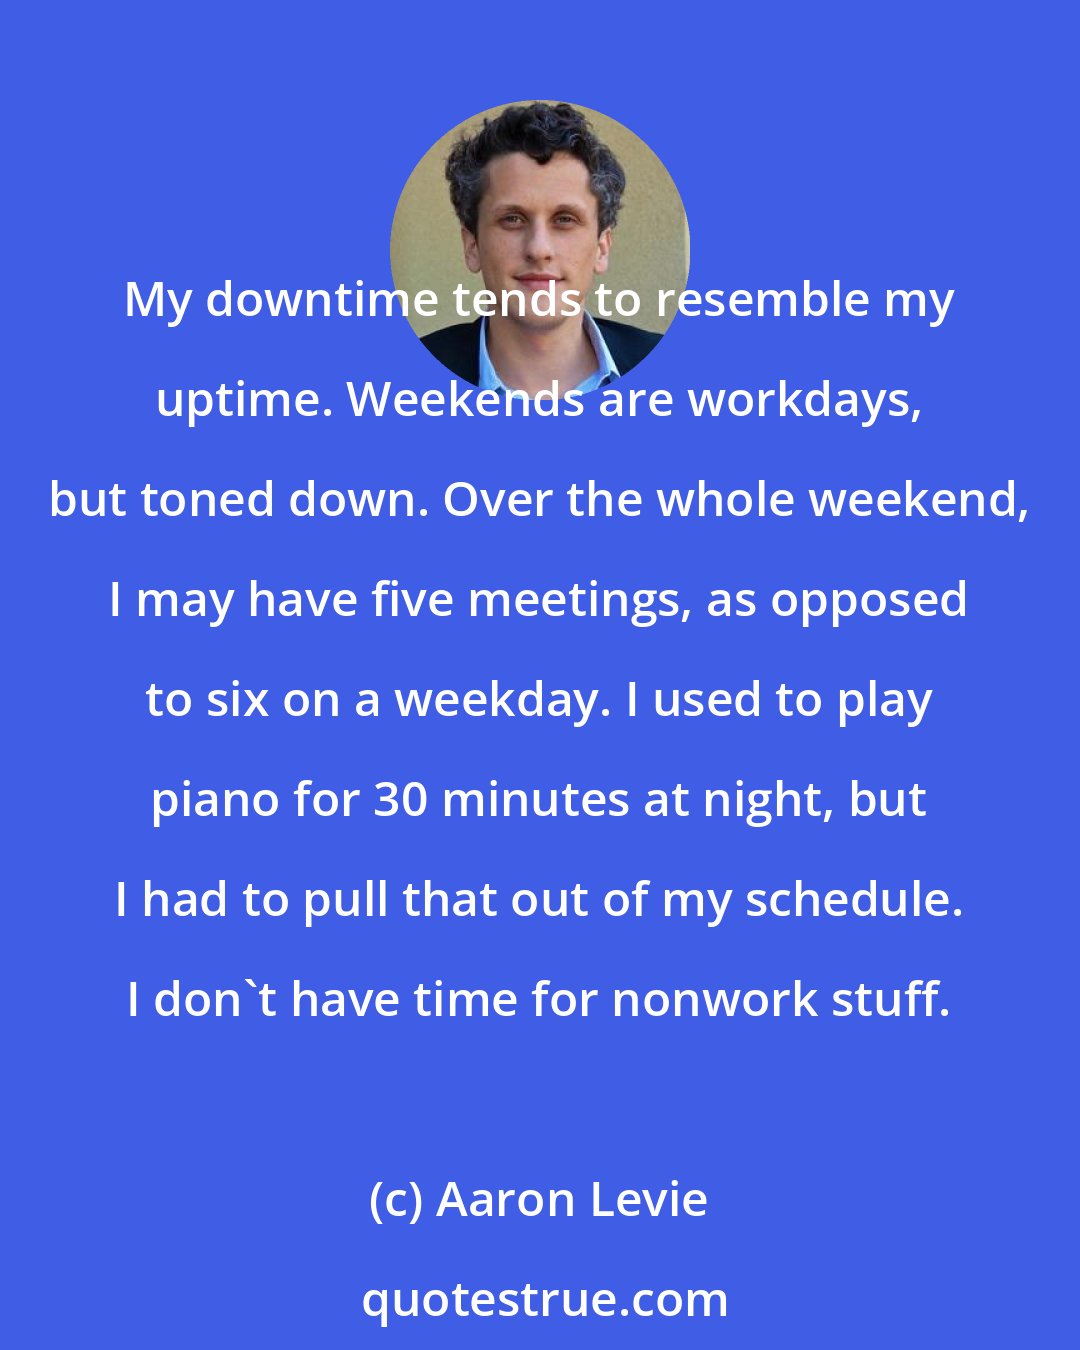 Aaron Levie: My downtime tends to resemble my uptime. Weekends are workdays, but toned down. Over the whole weekend, I may have five meetings, as opposed to six on a weekday. I used to play piano for 30 minutes at night, but I had to pull that out of my schedule. I don't have time for nonwork stuff.